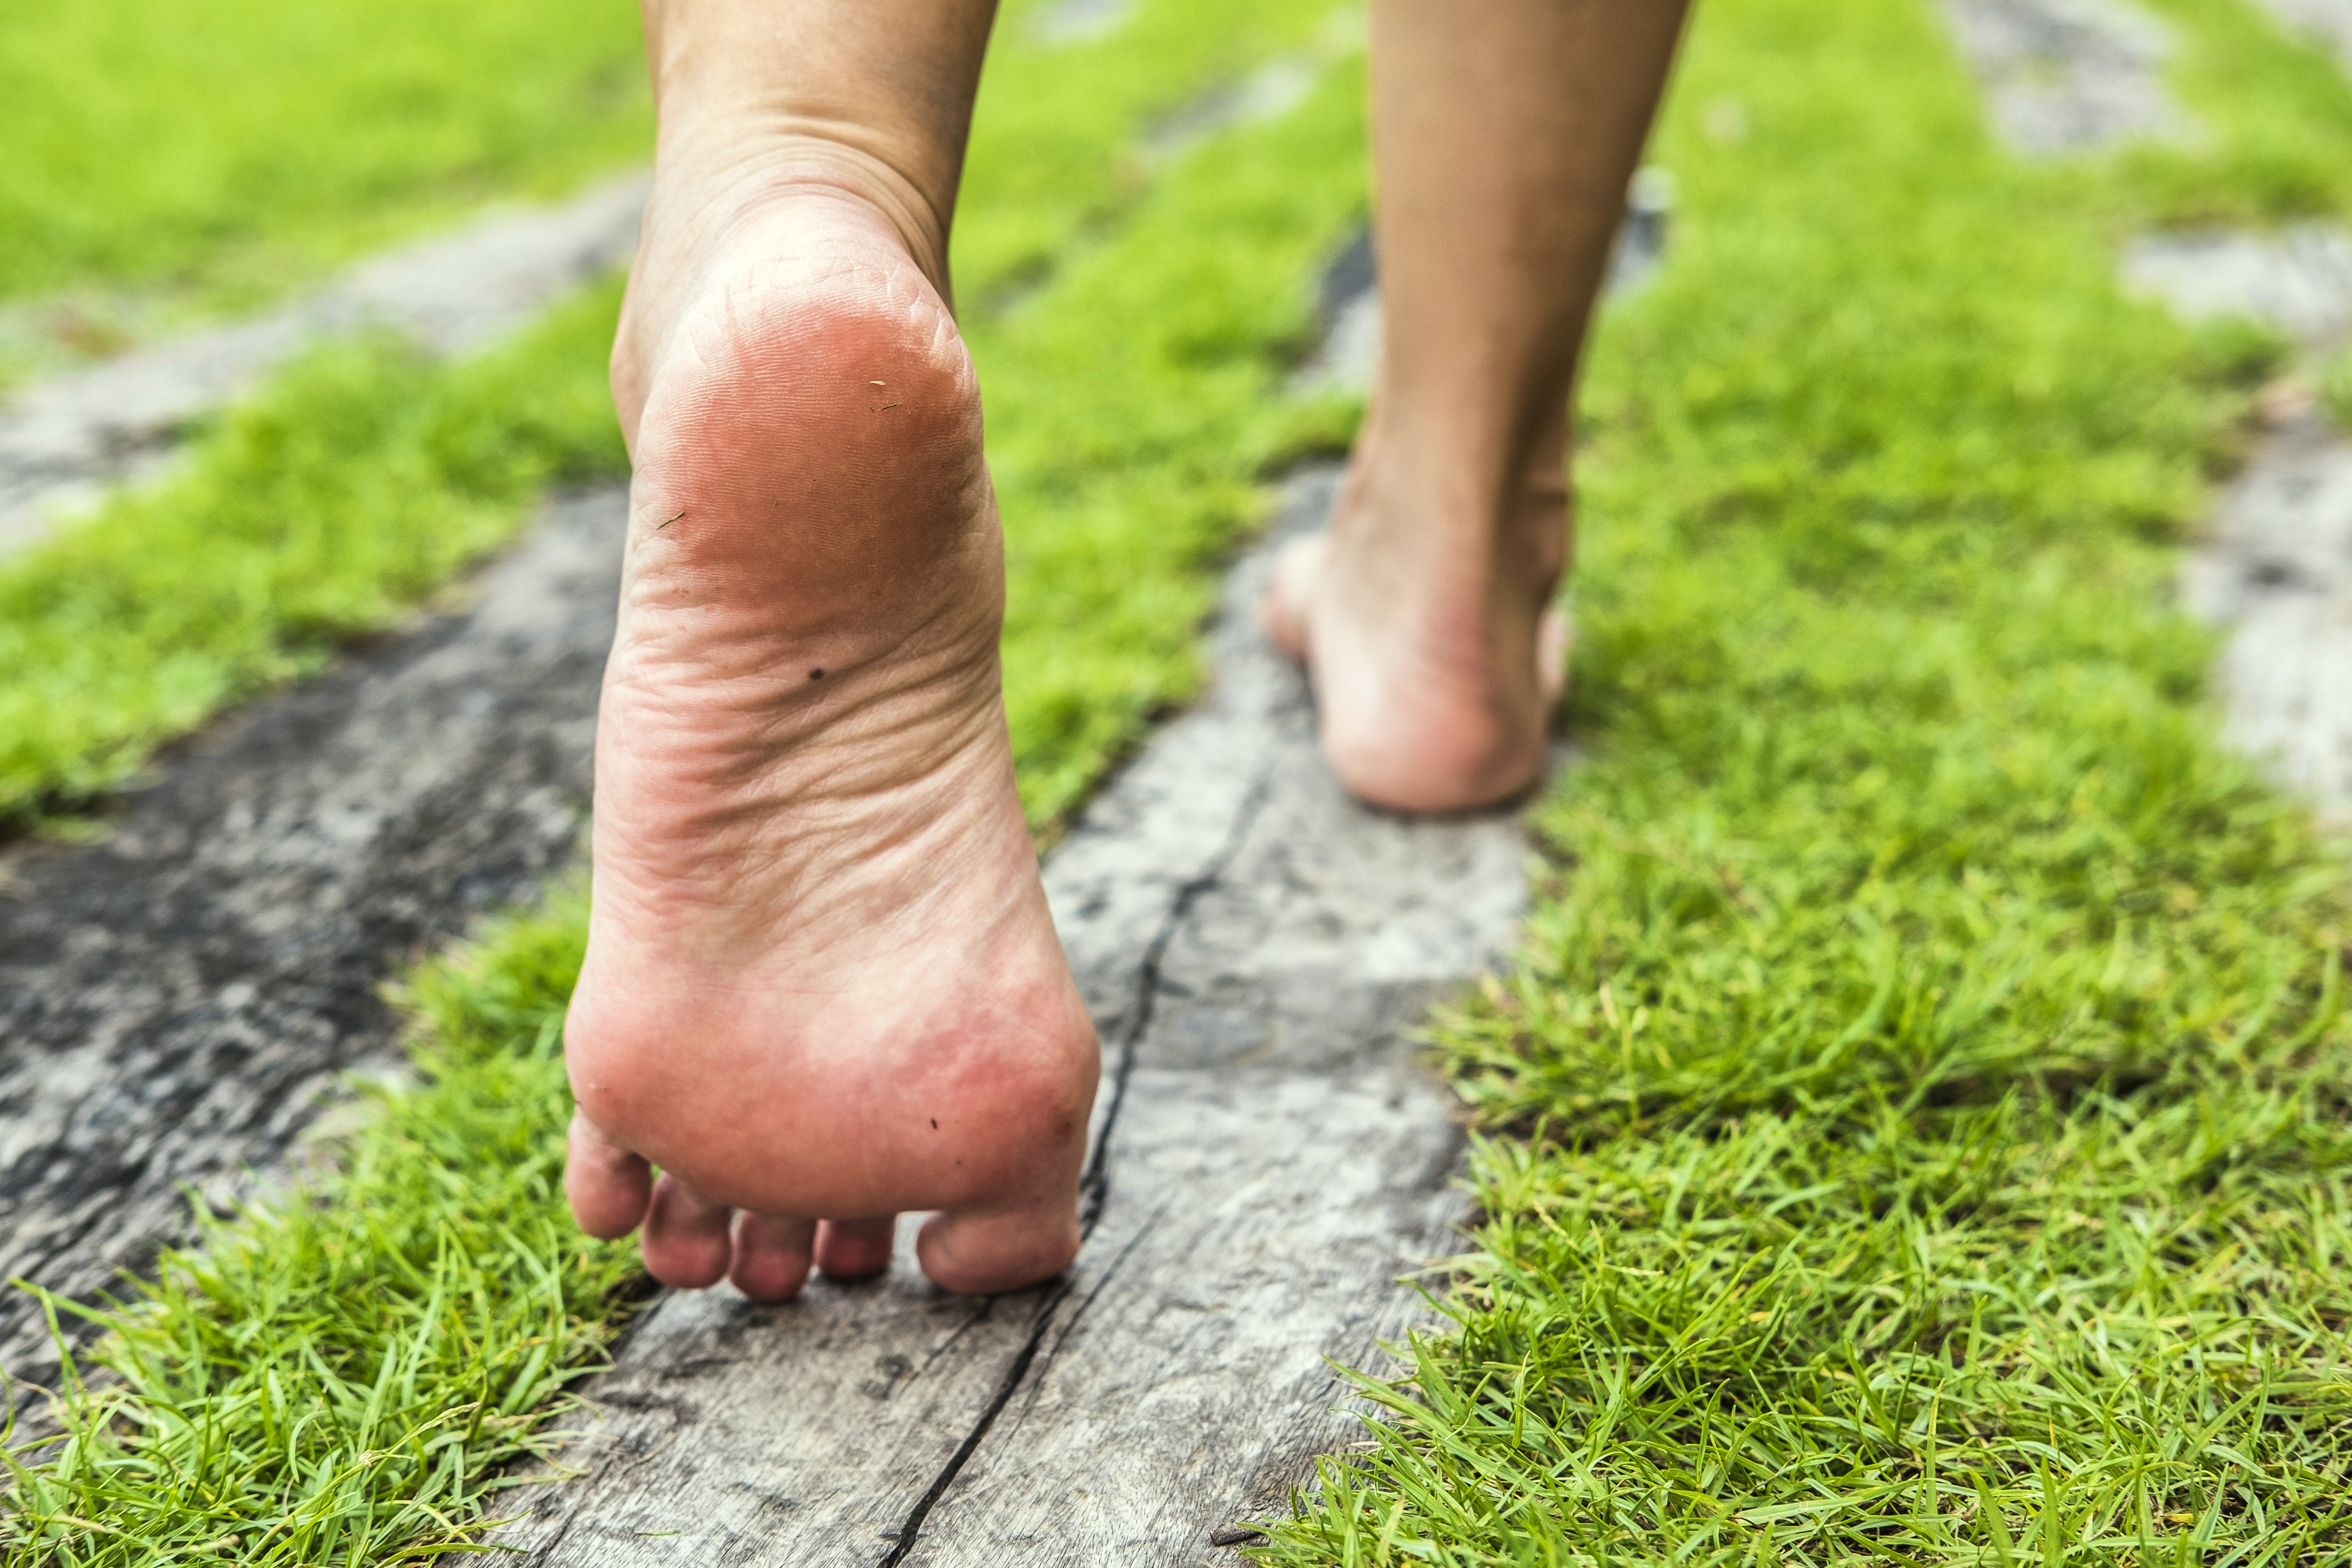 Go Touch Grass: The Healthy Aspect of Being Outside